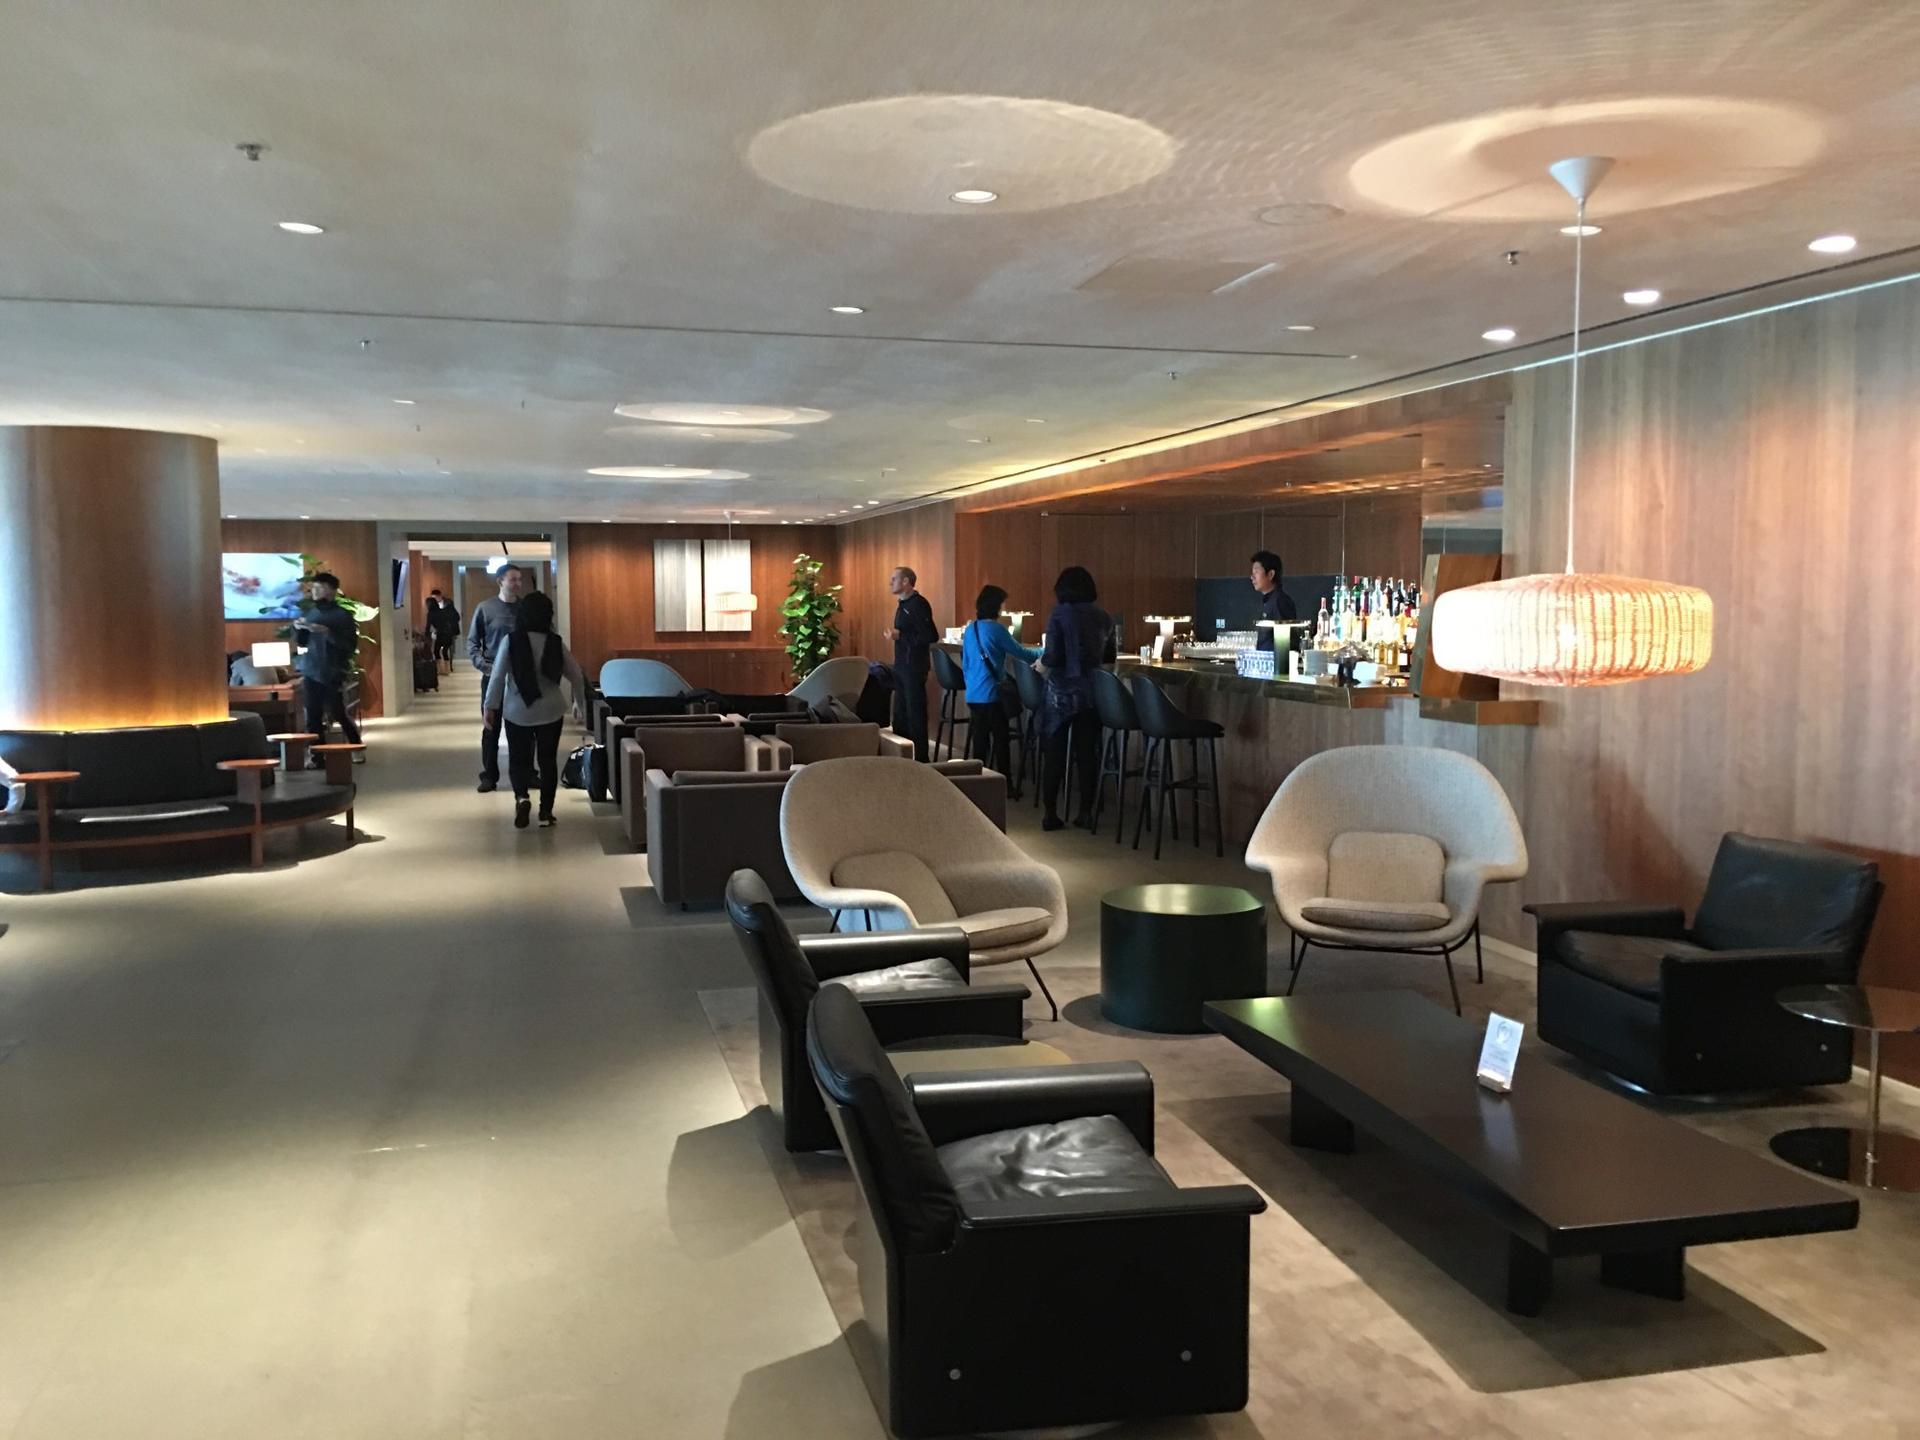 Cathay Pacific The Pier Business Class Lounge image 27 of 61